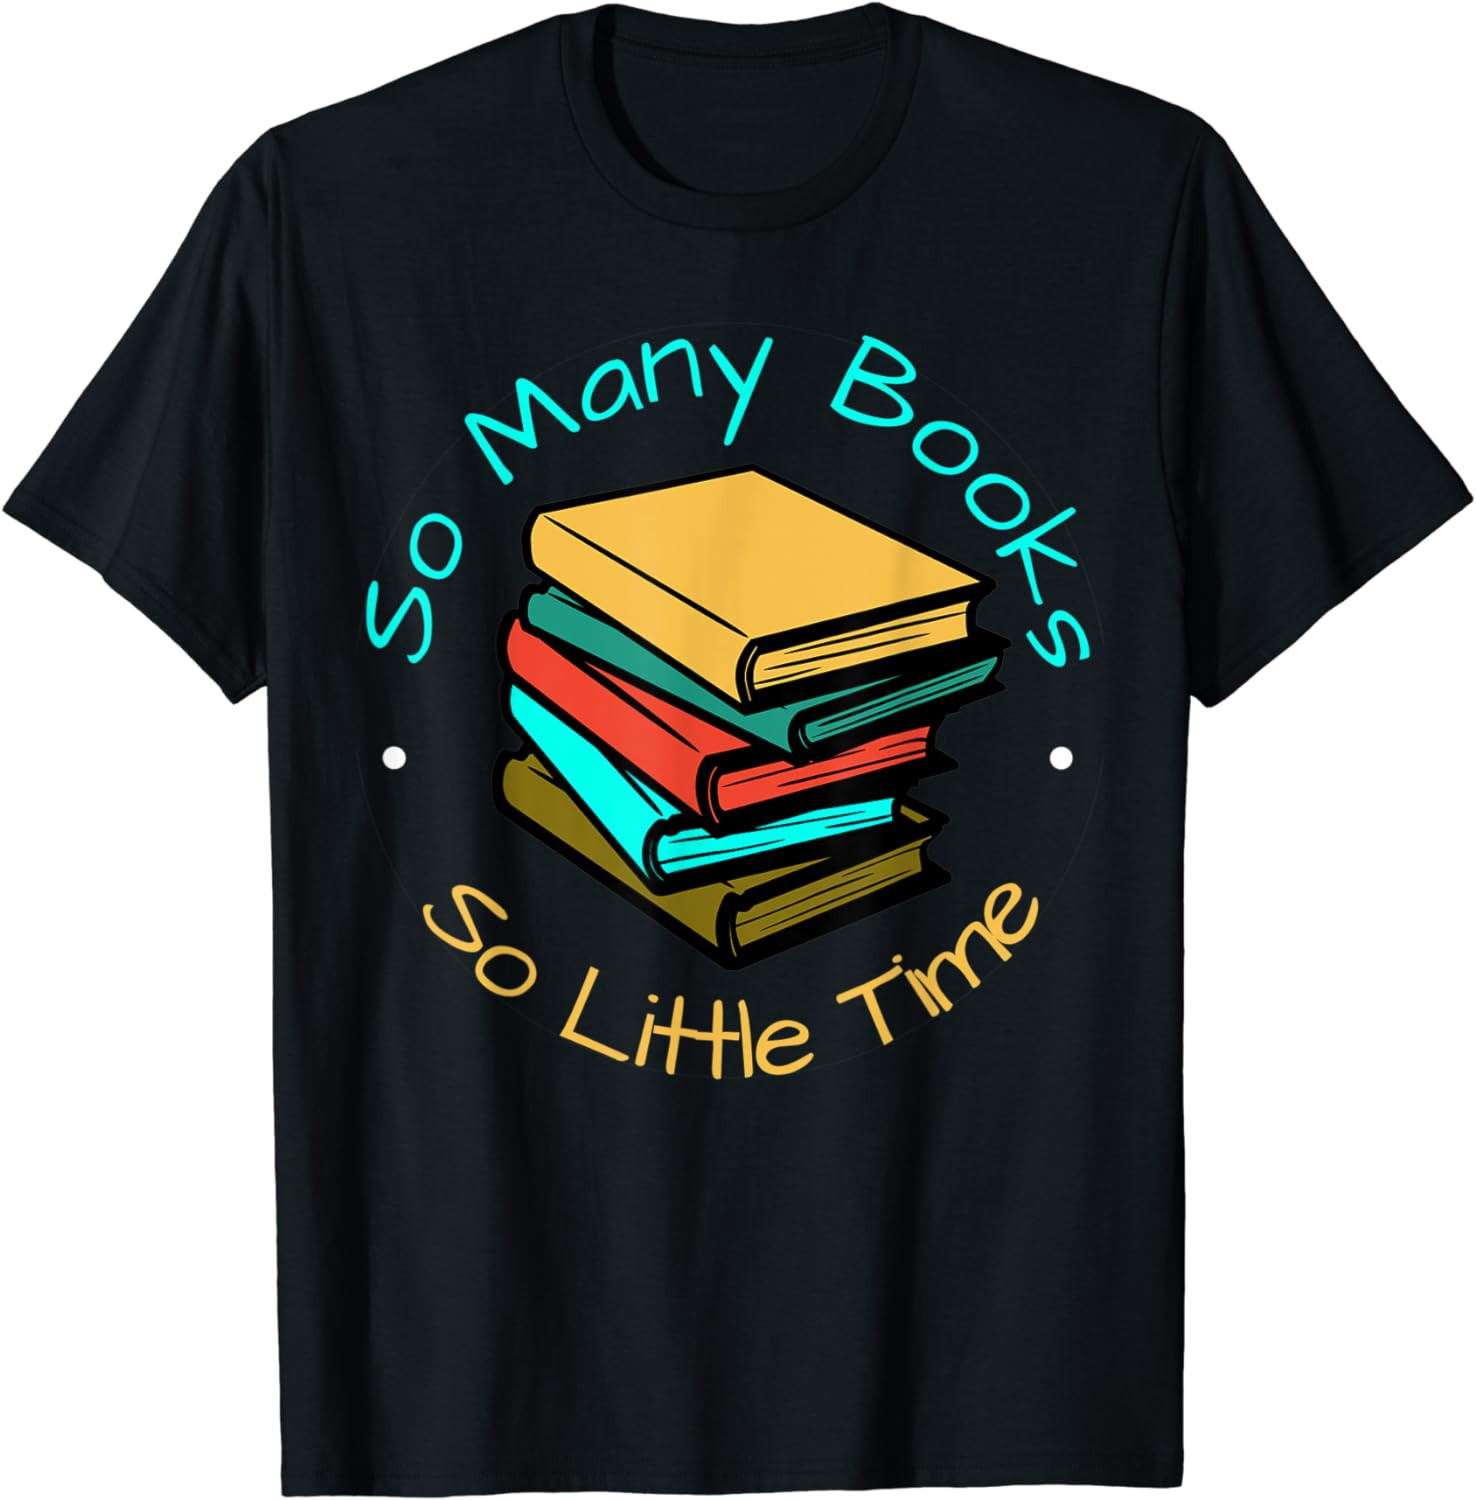 So Many Books And Yet So Little Time T-Shirt